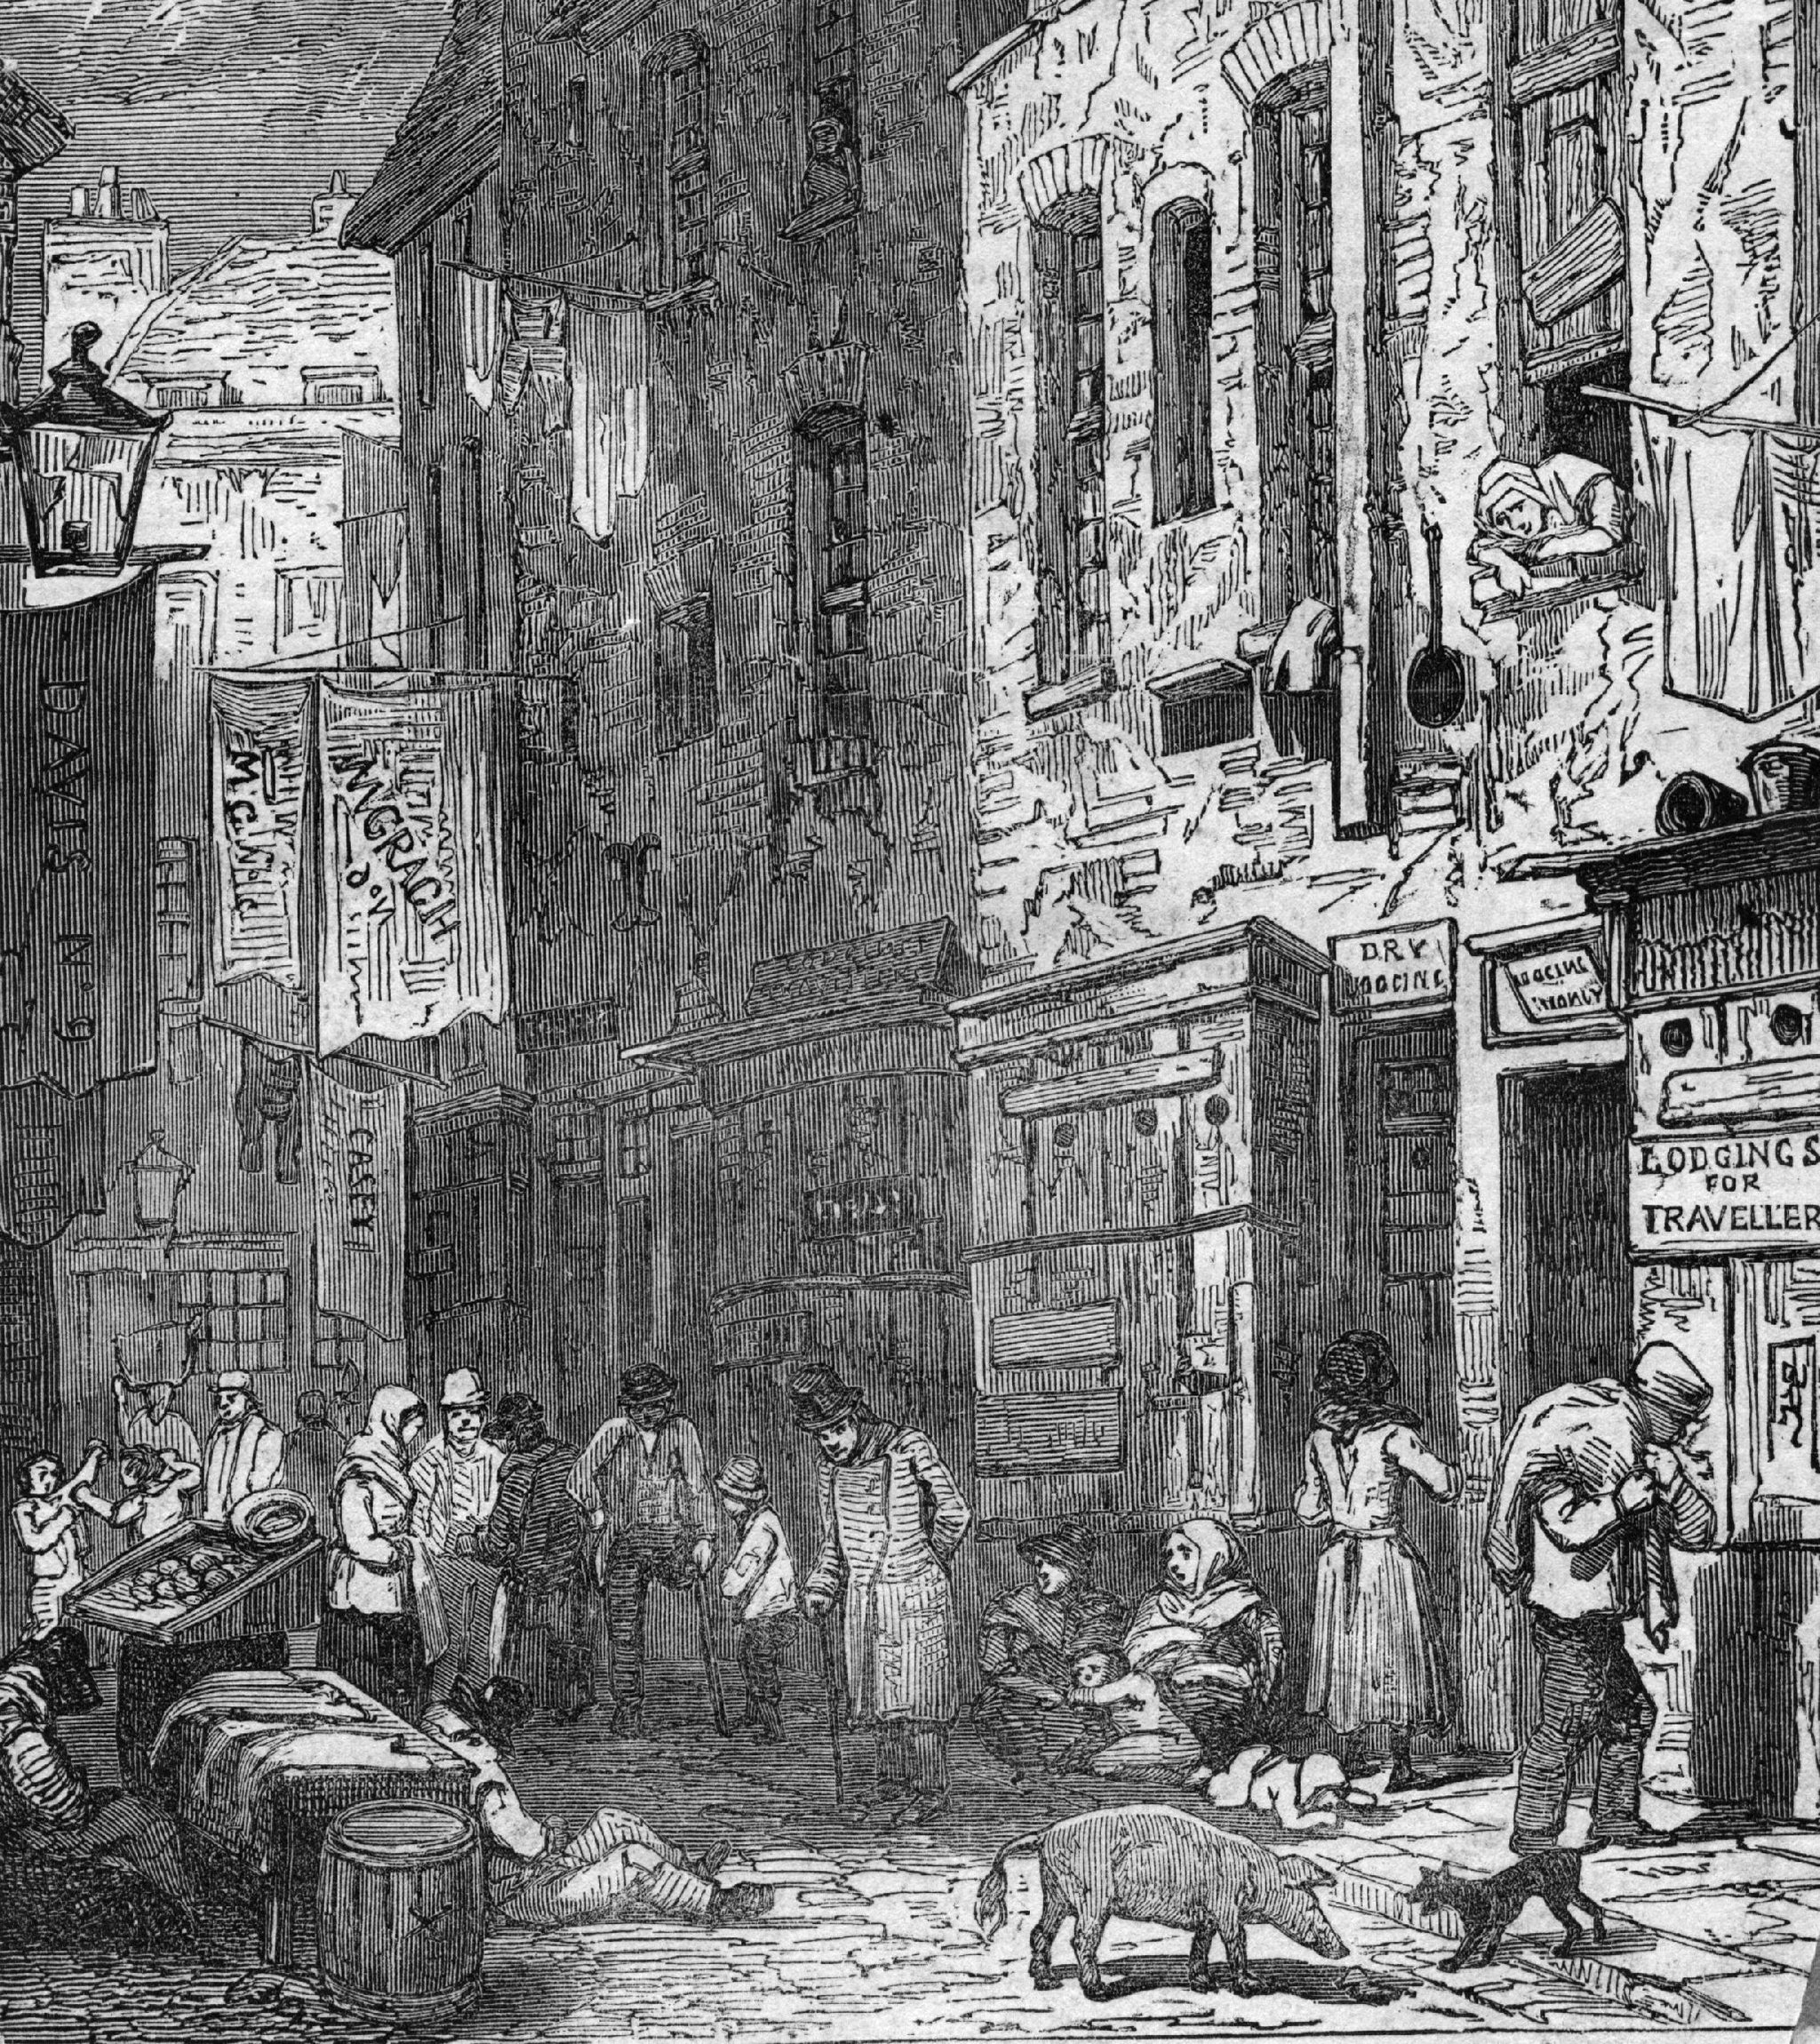 Haves and have-nots: 1840s London slums